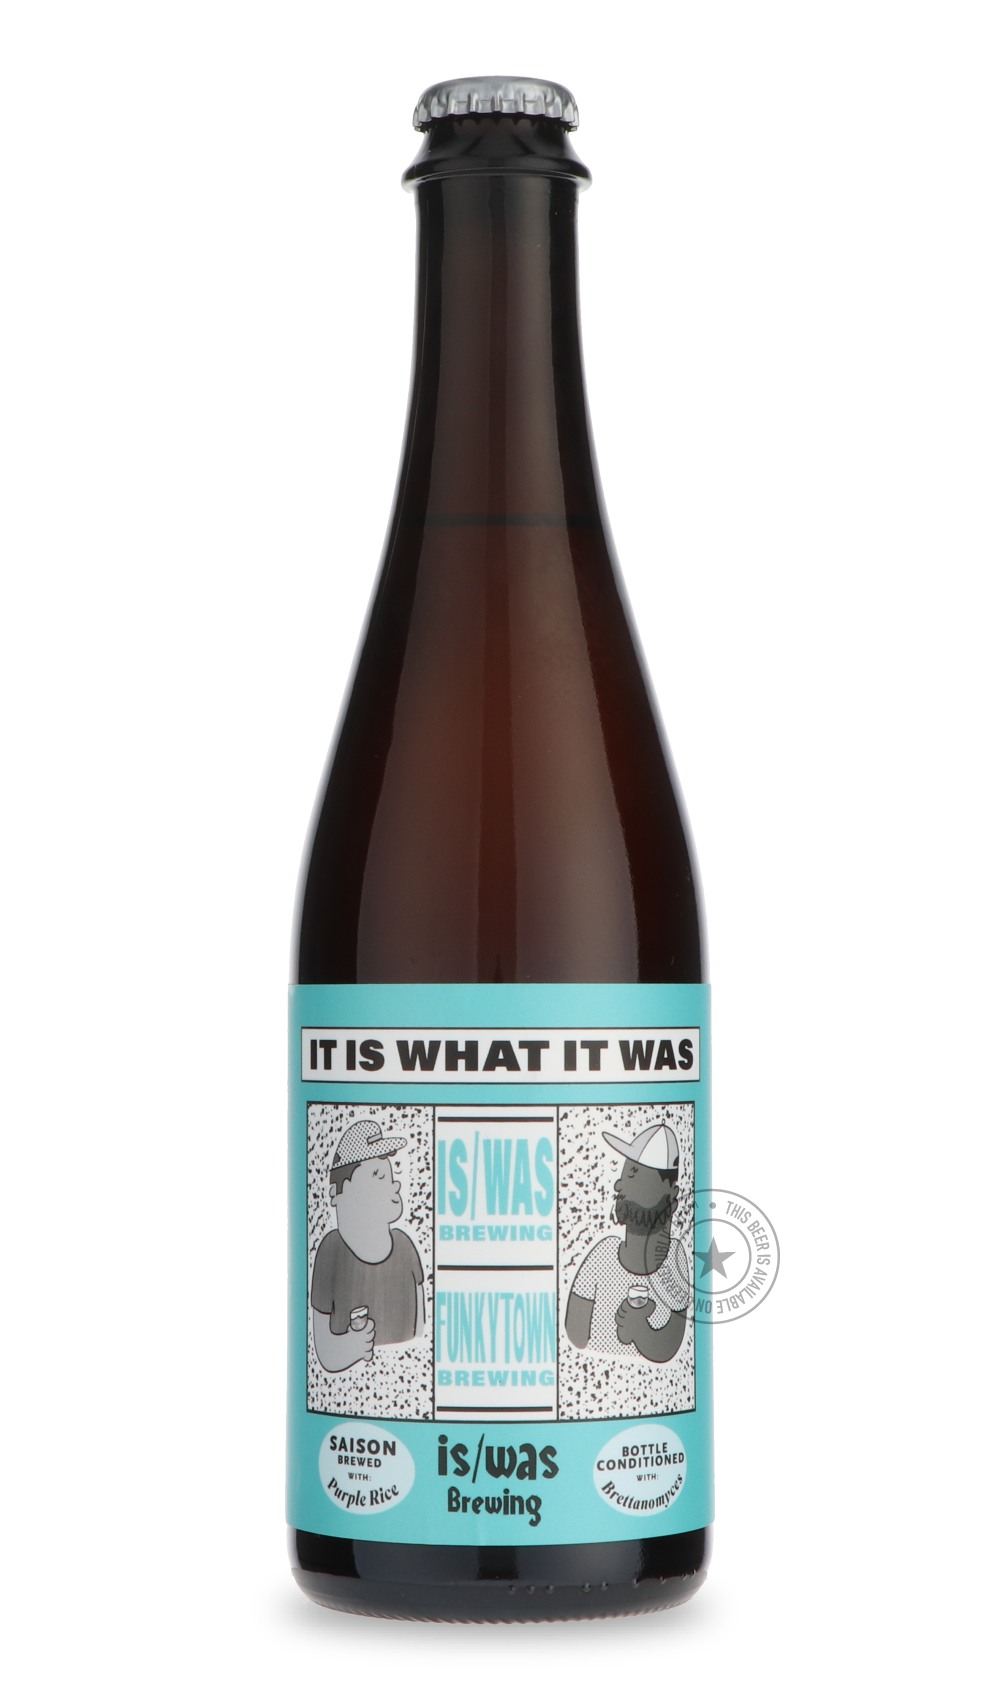 -is/was- It Is What It Was - Bottle Conditioned With Brettanomyces-Sour / Wild & Fruity- Only @ Beer Republic - The best online beer store for American & Canadian craft beer - Buy beer online from the USA and Canada - Bier online kopen - Amerikaans bier kopen - Craft beer store - Craft beer kopen - Amerikanisch bier kaufen - Bier online kaufen - Acheter biere online - IPA - Stout - Porter - New England IPA - Hazy IPA - Imperial Stout - Barrel Aged - Barrel Aged Imperial Stout - Brown - Dark beer - Blond - B